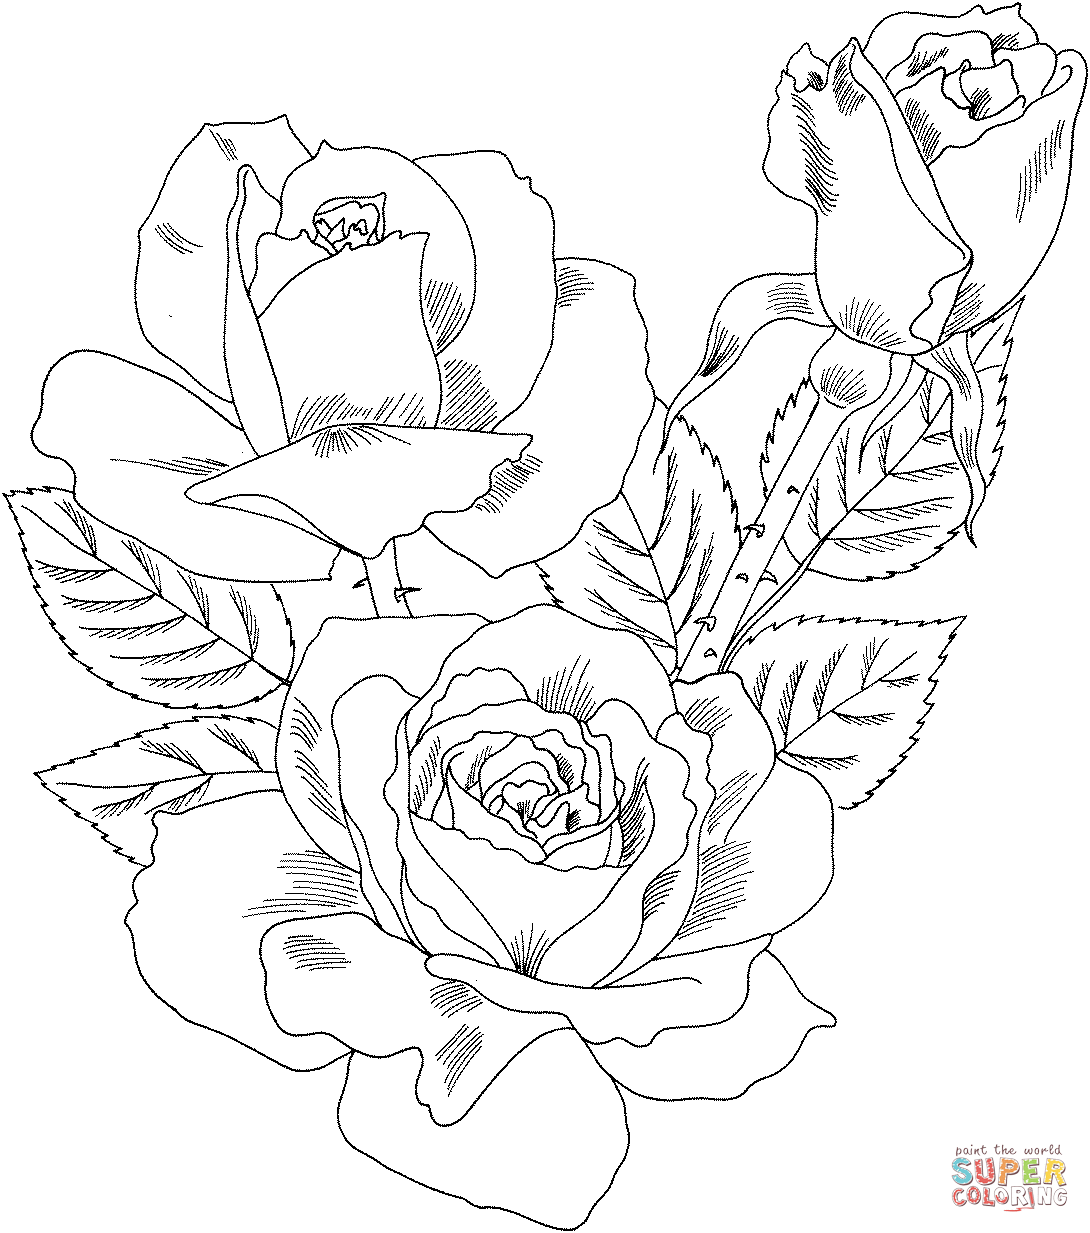 Roses coloring pages | Free Coloring Pages